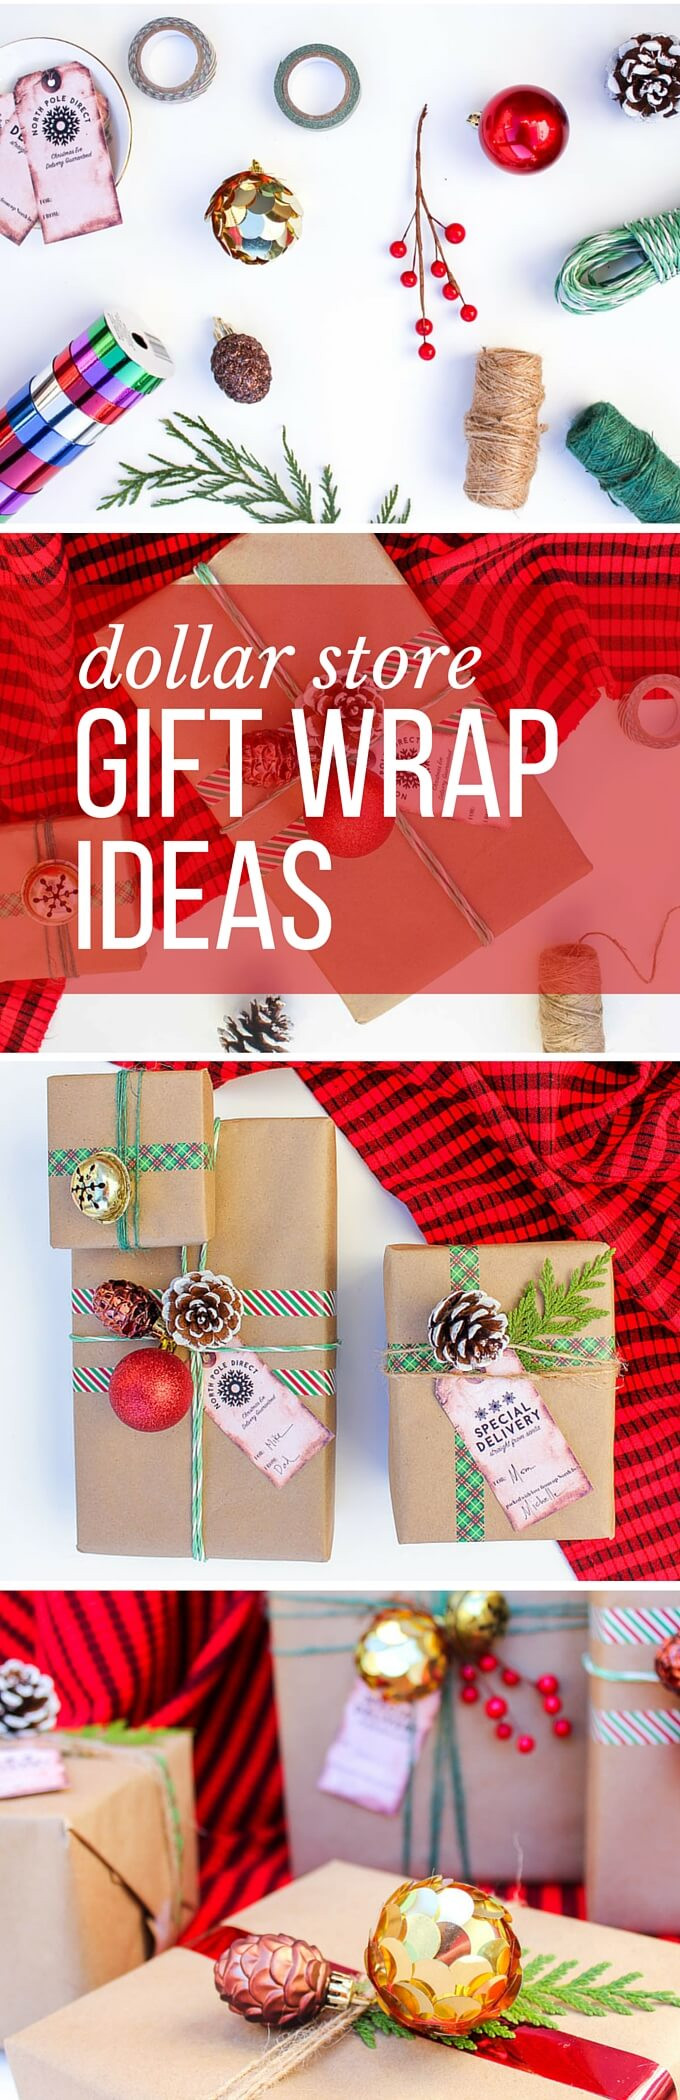 DIY Dollar Store Gift Ideas
 Easy Dollar Store Christmas Gift Wrap Ideas Free Gift Tags